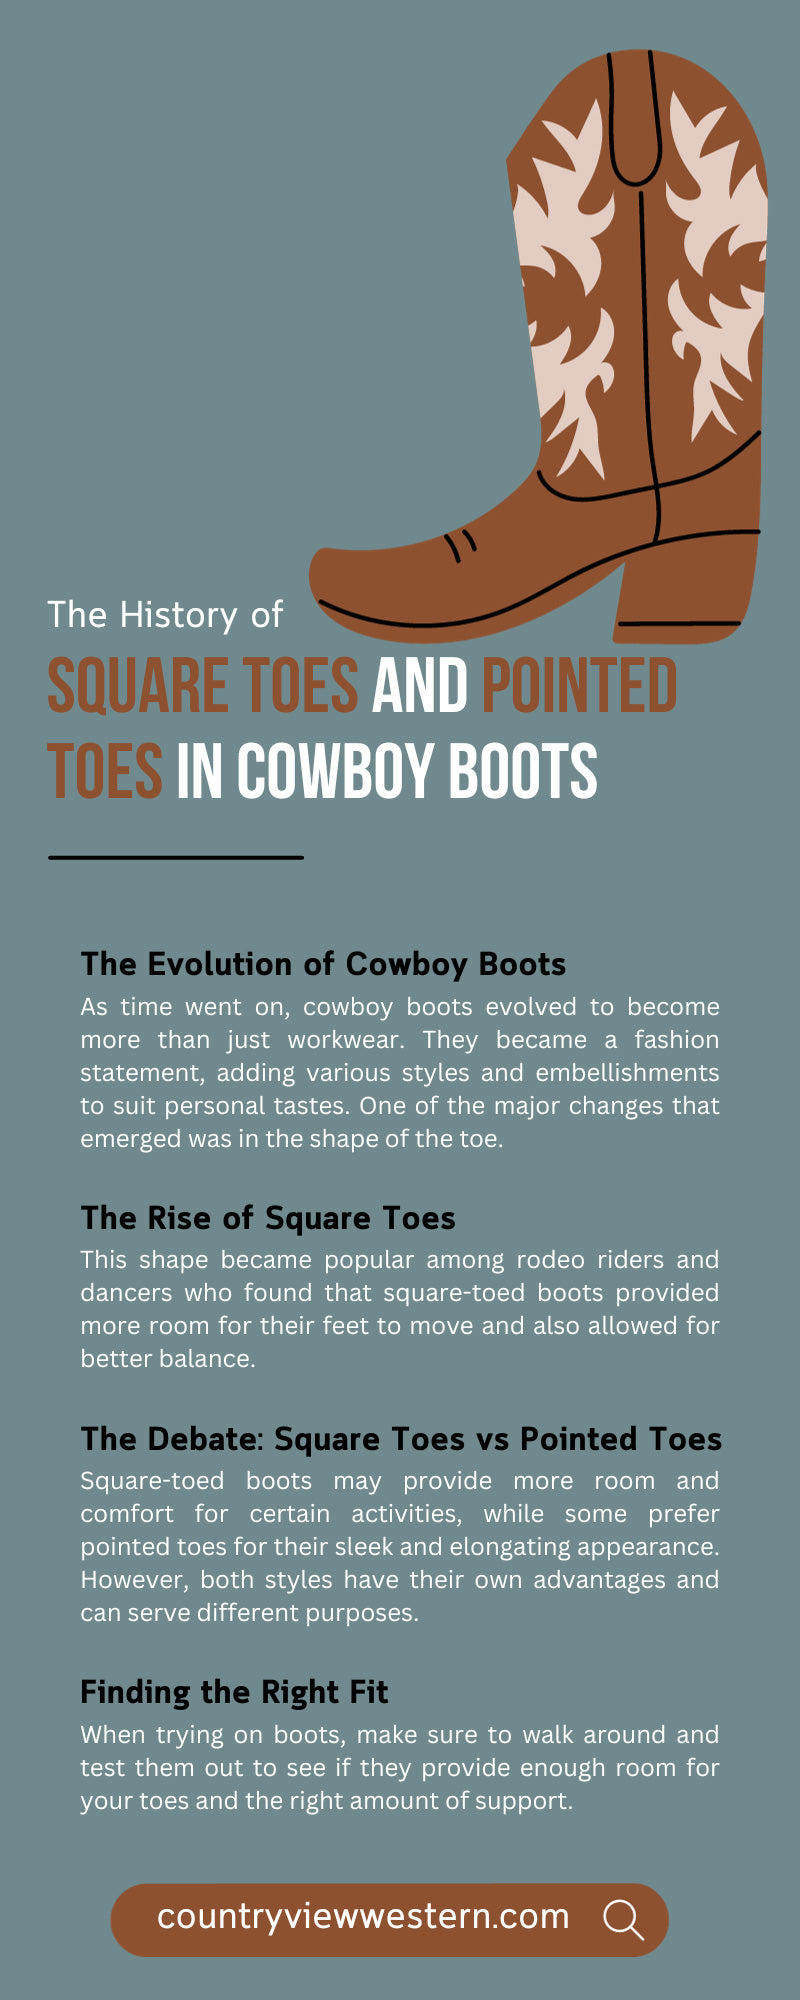 The History of Square Toes and Pointed Toes in Cowboy Boots